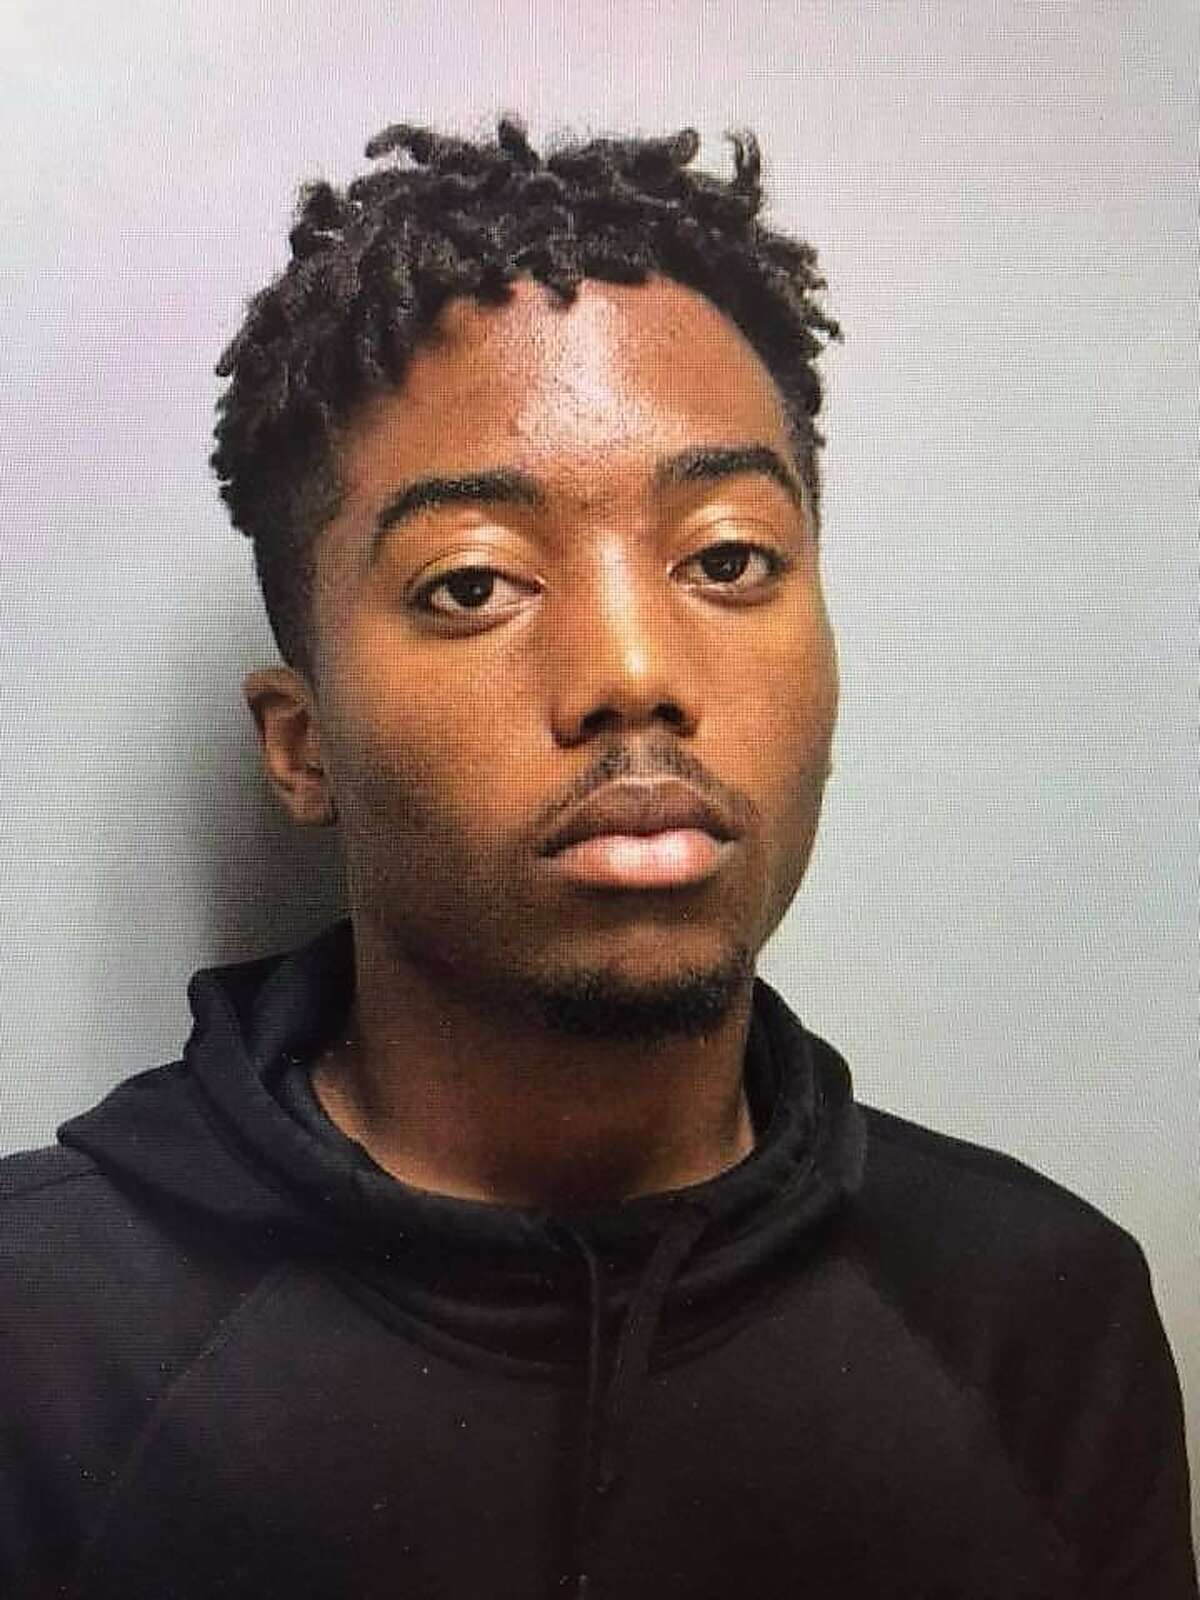 Tyrone McAllister, 18, is the son of Union City Police Chief who was caught on surveillance camera attacking a 71-year-old Sikh man in Manteca on Monday, August 6, 2018. Detectives are investigating whether the assault can be considered a hate crime under the California Penal Code.